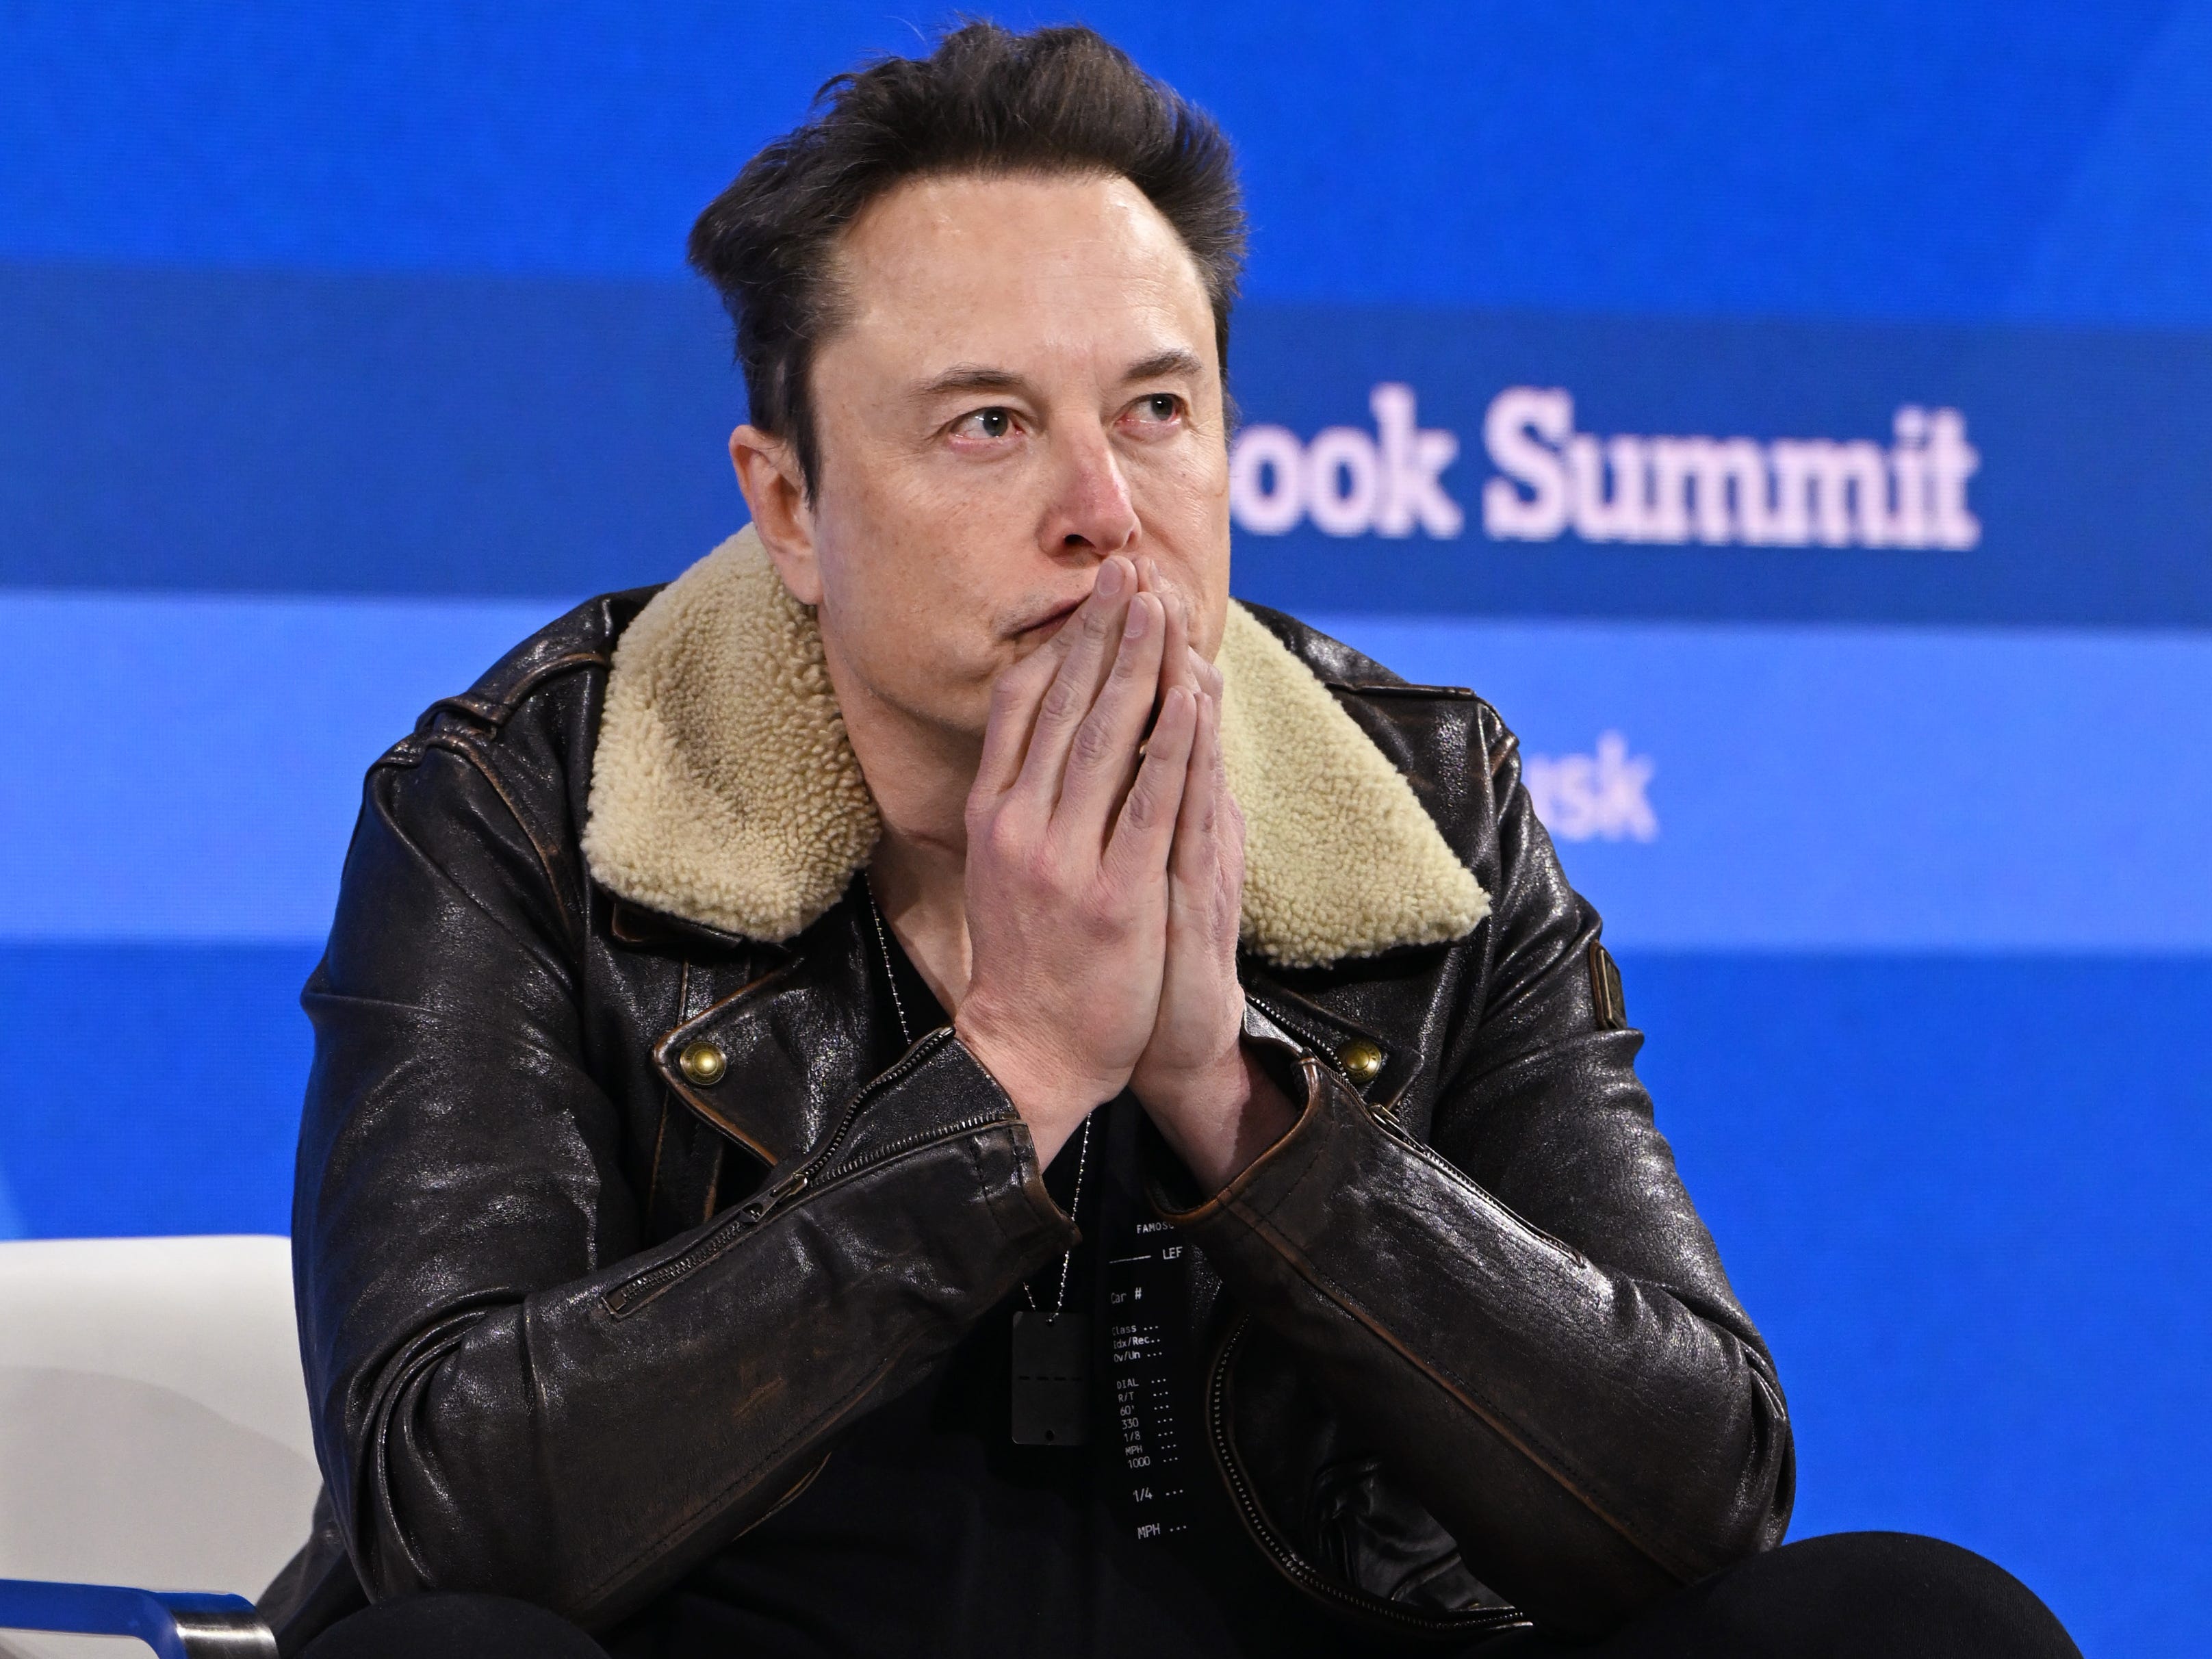 Grimes' mother says Elon Musk is 'withholding' his children from her daughter: 'Please Elon, I beg you'